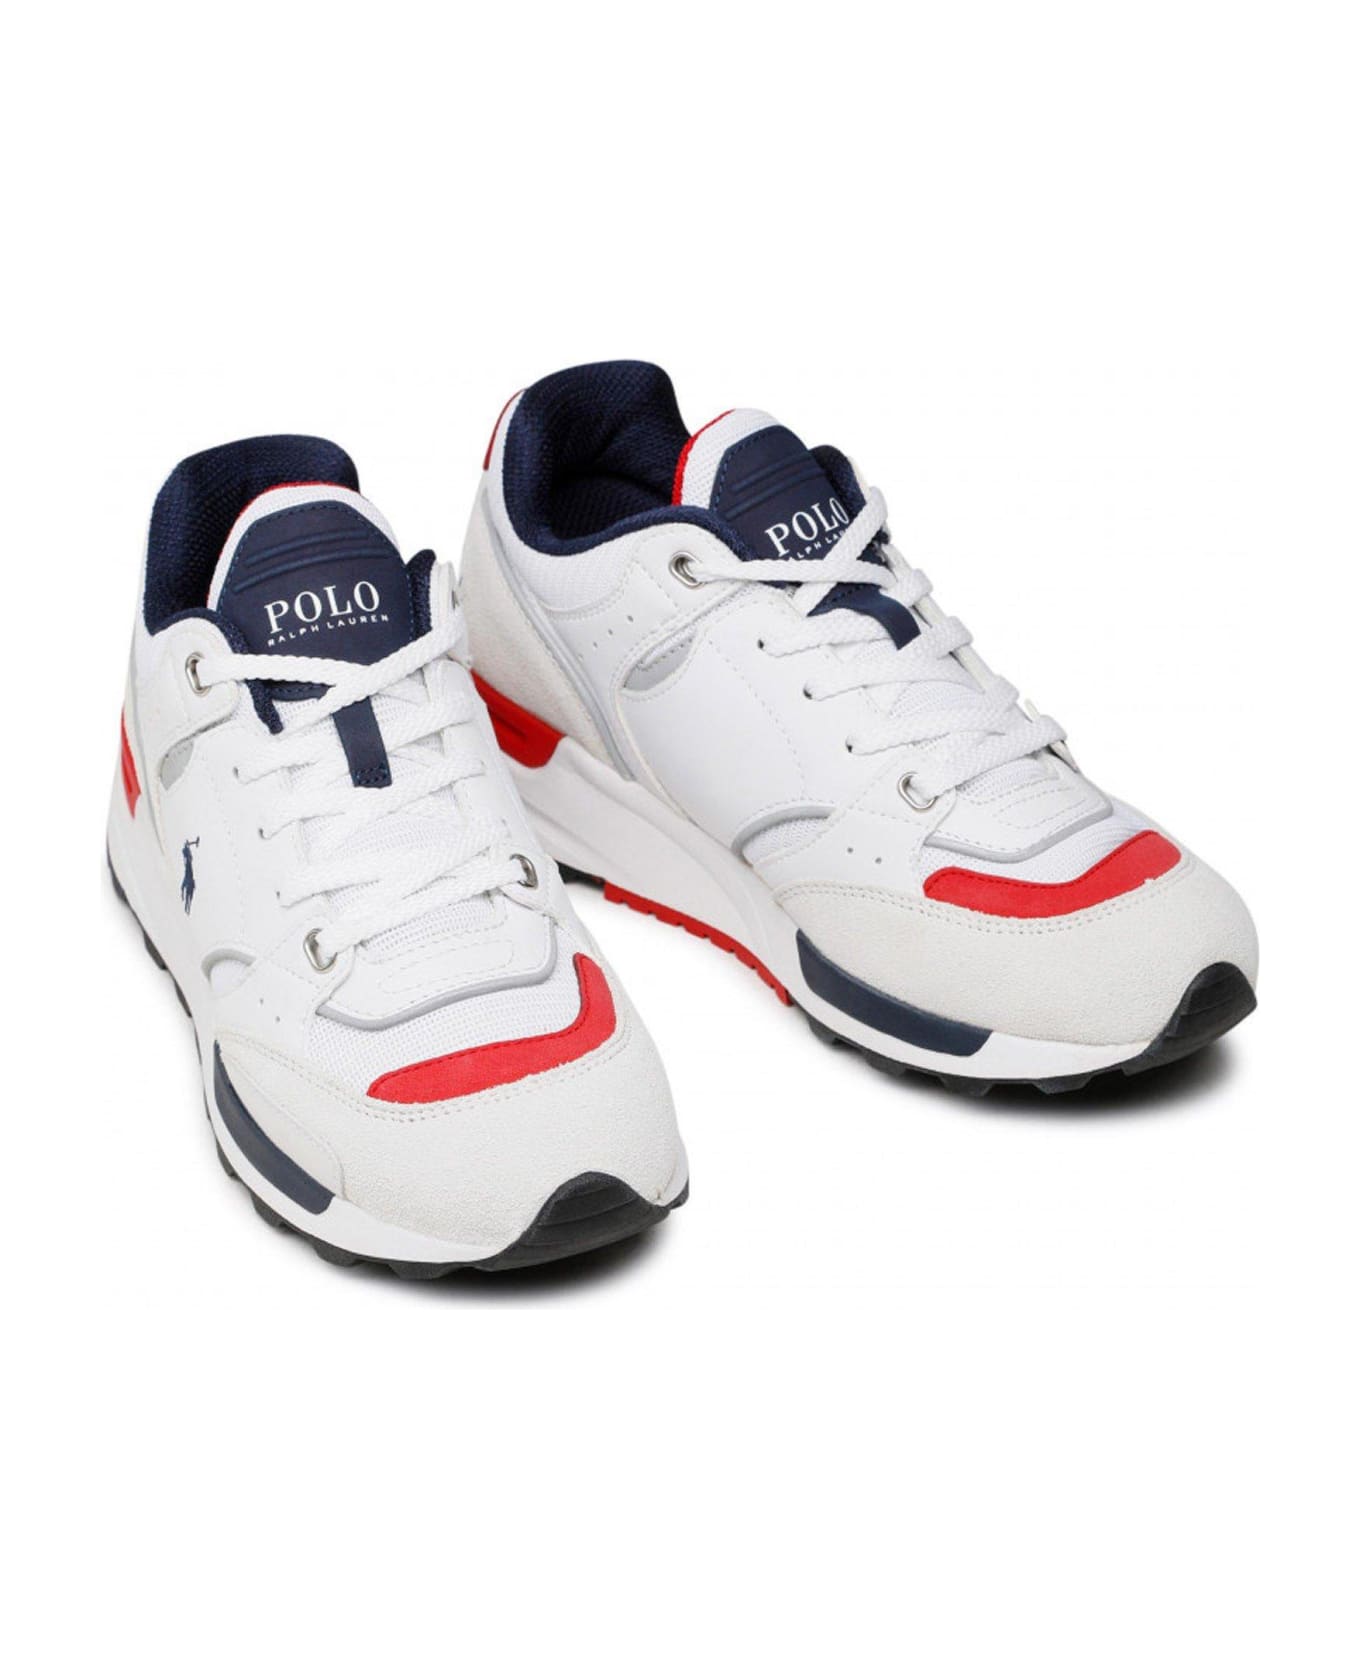 Polo Ralph Lauren Panelled Lace-up Sneakers - Grey/navy/white/red